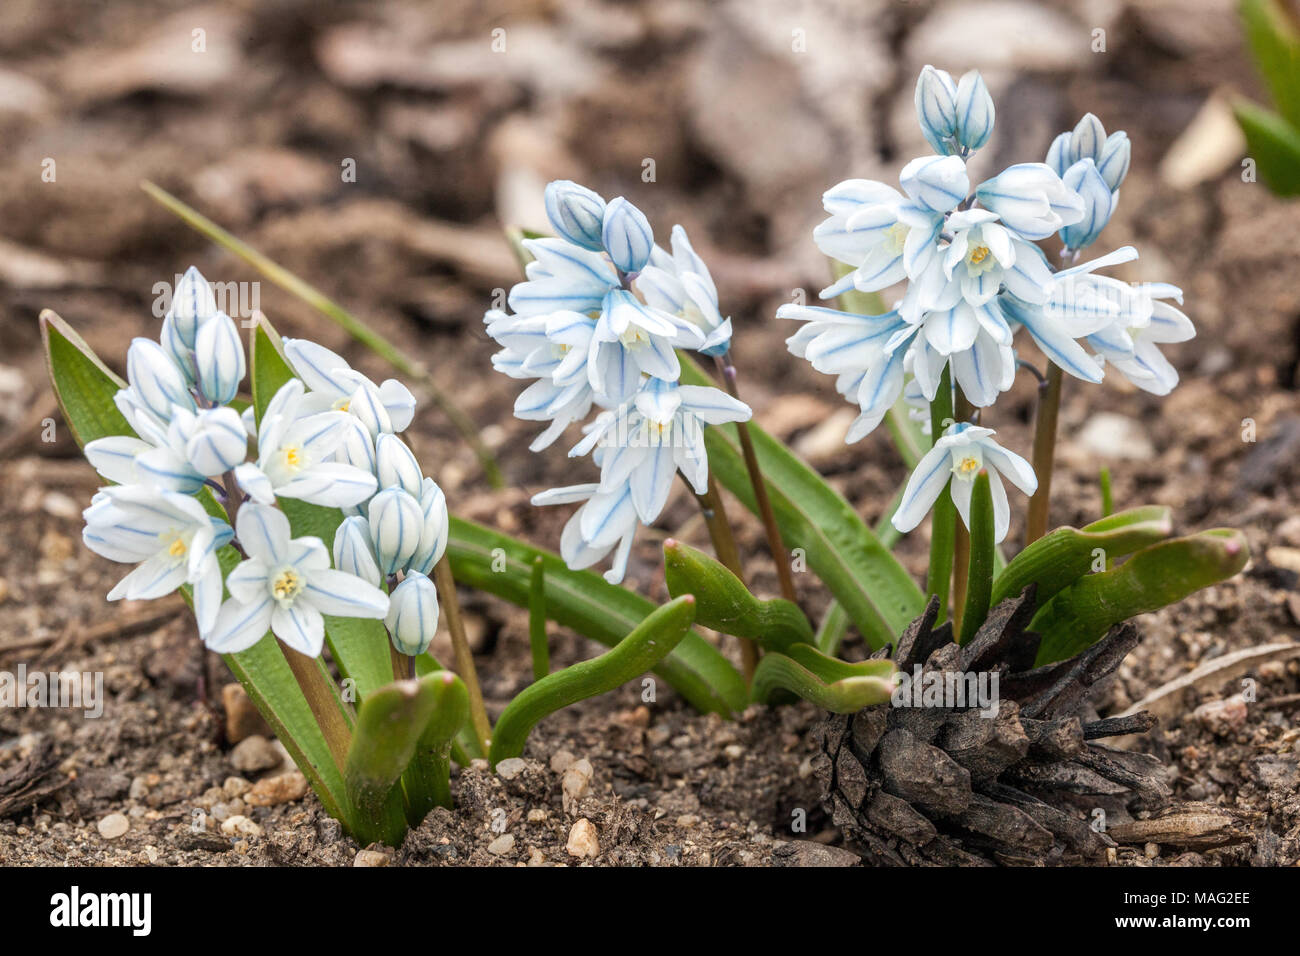 Puschkinia scilloides libanotica Striped squill Russian Snowdrop Spring Garden Plant Rockery Bulbous plant Blooming Alpine Flowers Flowering March Stock Photo